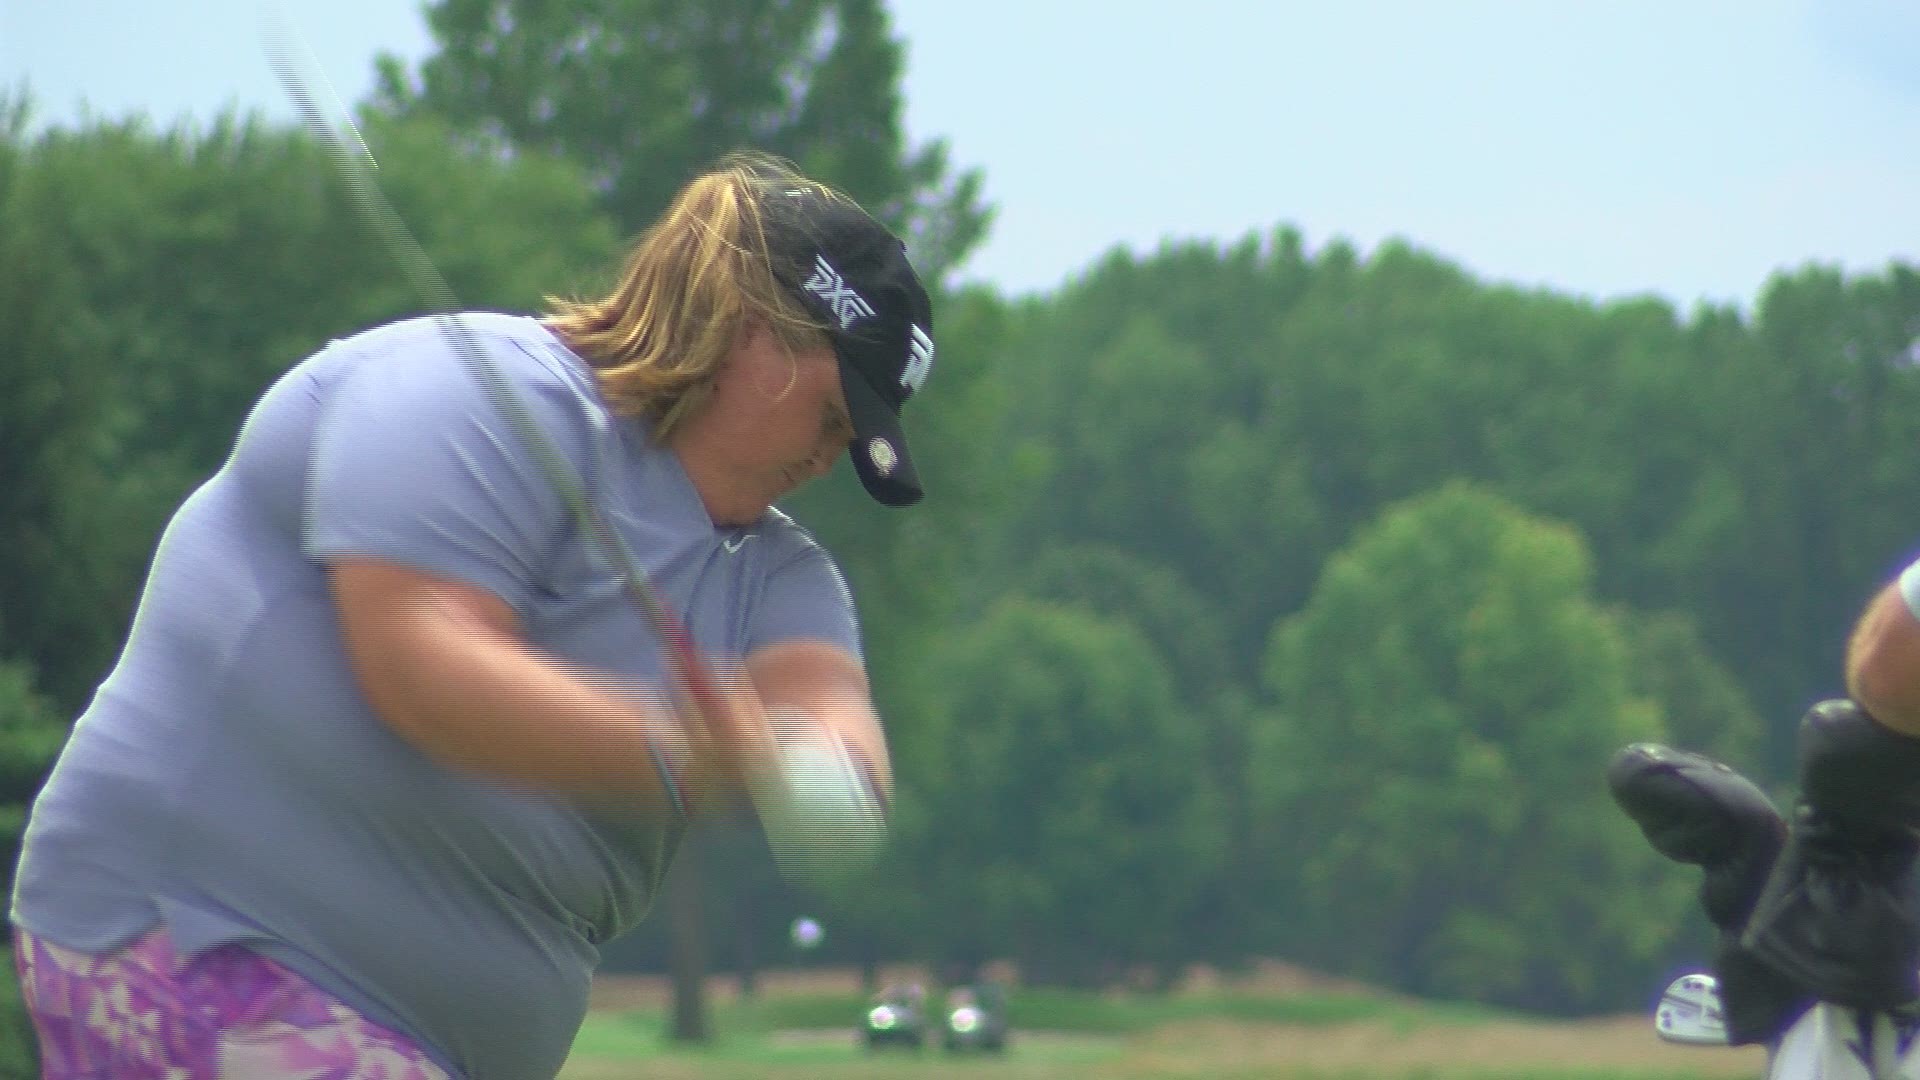 Haley Moore is a name on tour you might not be familiar with yet, but you will be. She's hoping her overcoming of bullying will inspire an entire generation.